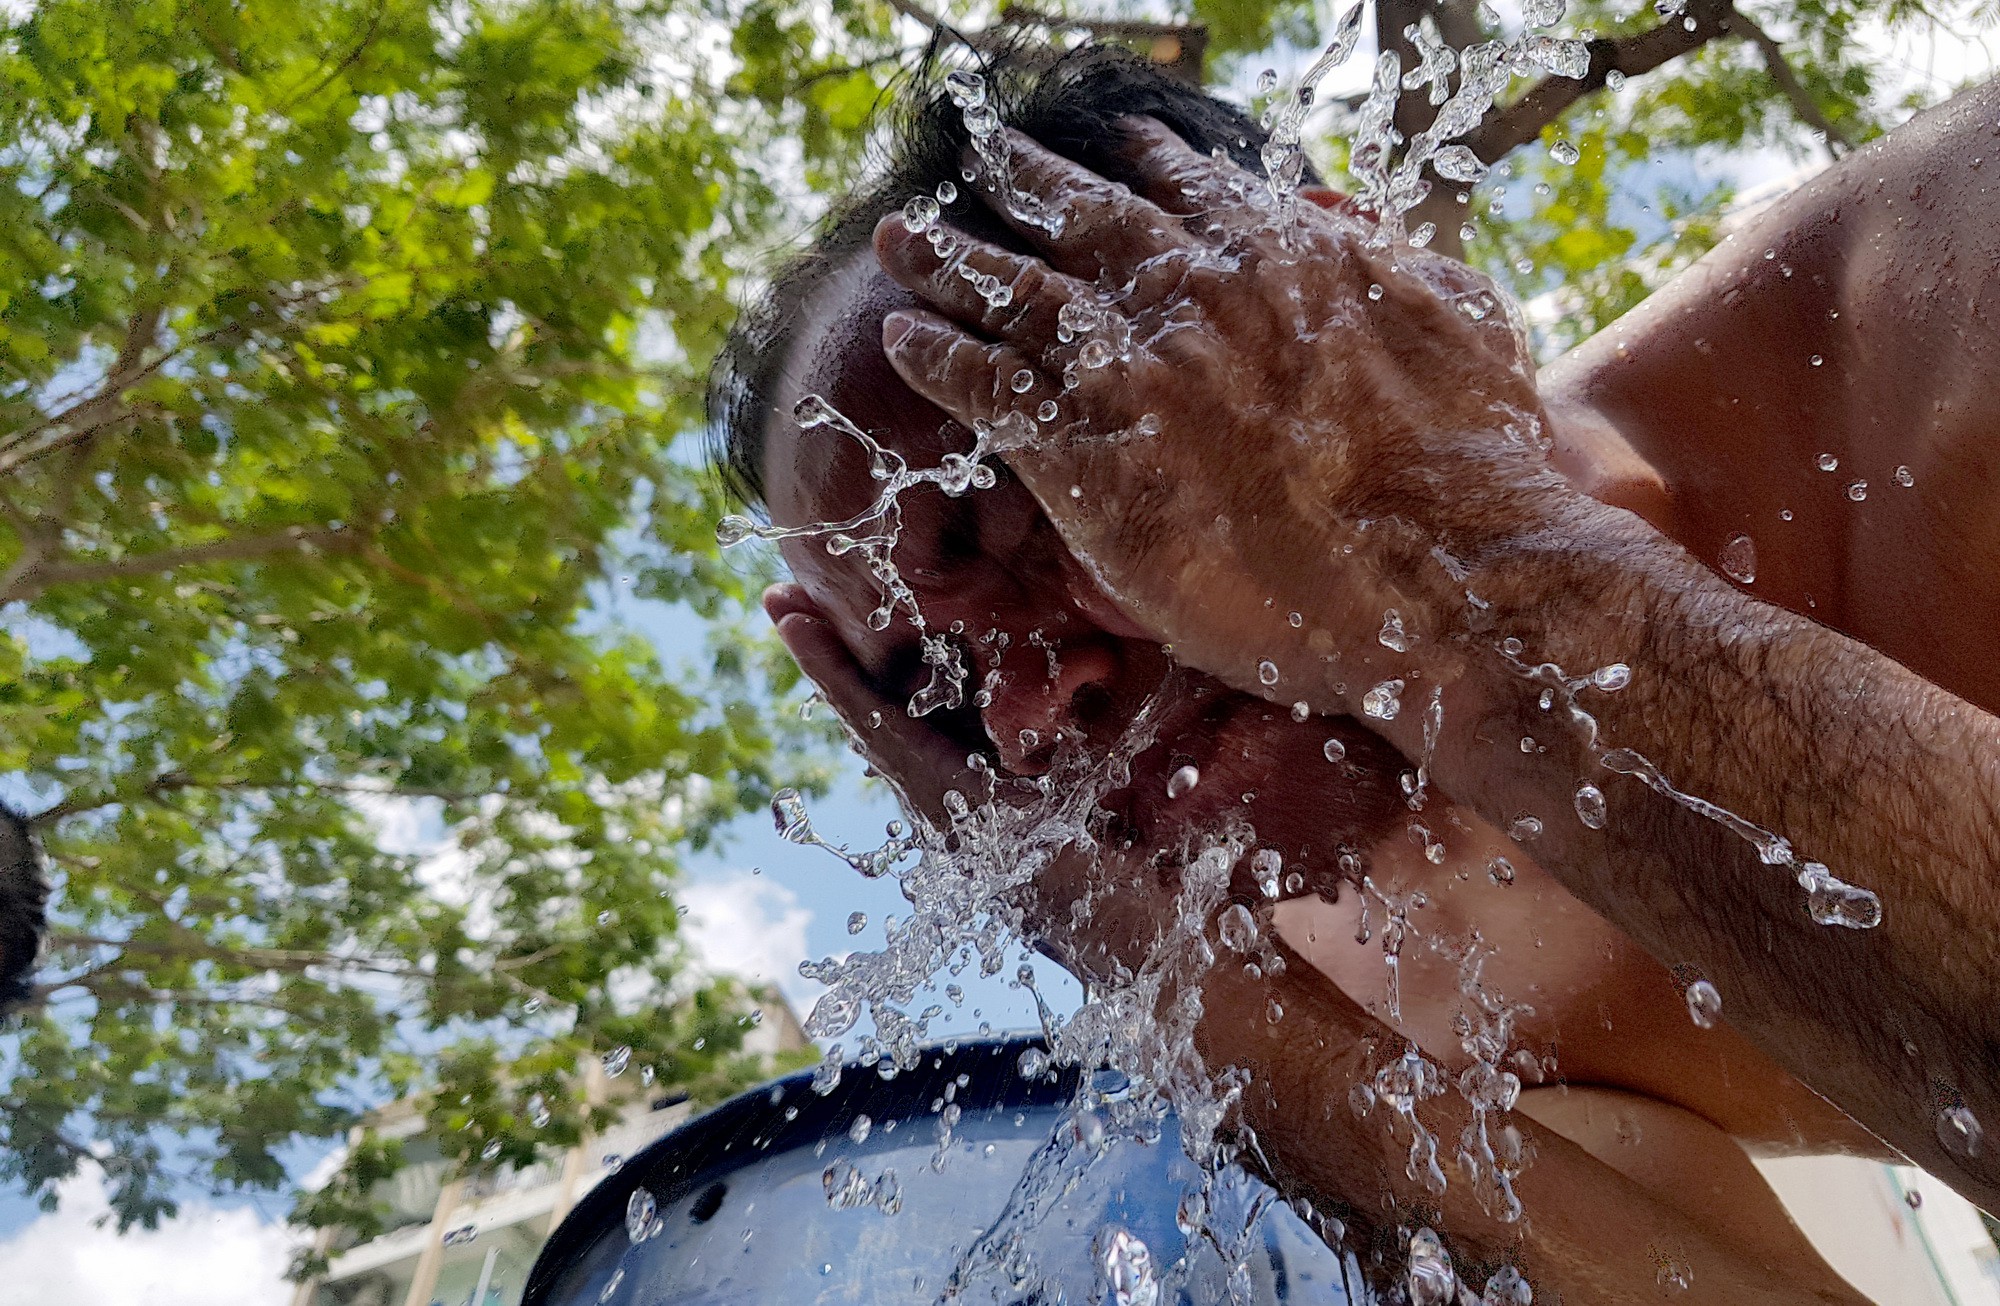 A drainage worker washes his face along a street in Ho Chi Minh City, Vietnam. Photo: Tuoi Tre